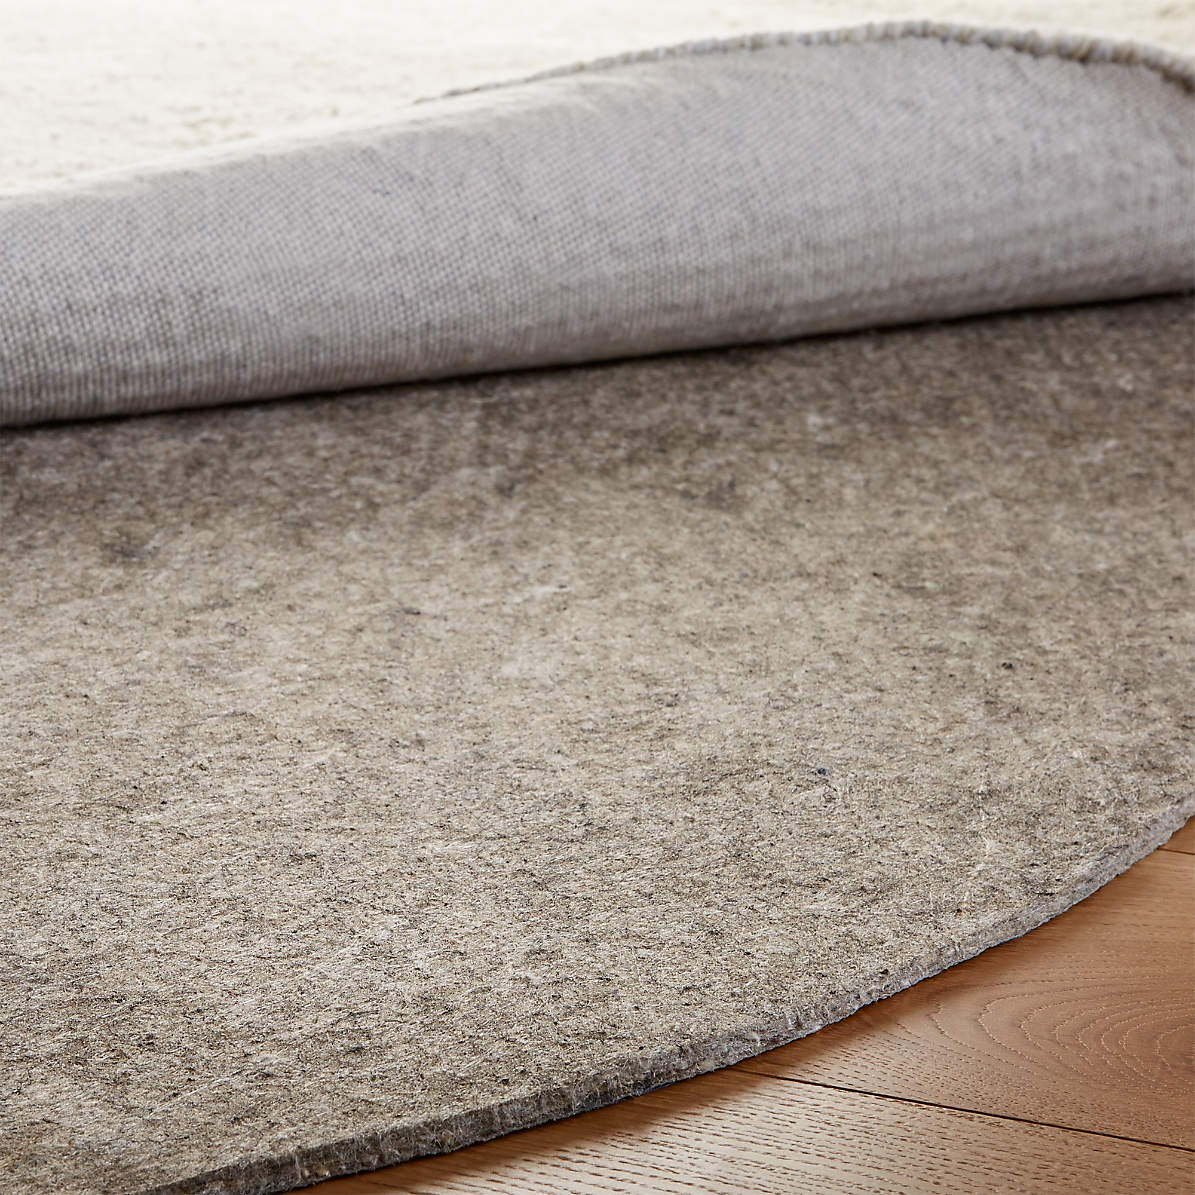 What is a Good Carpet Padding Thickness?